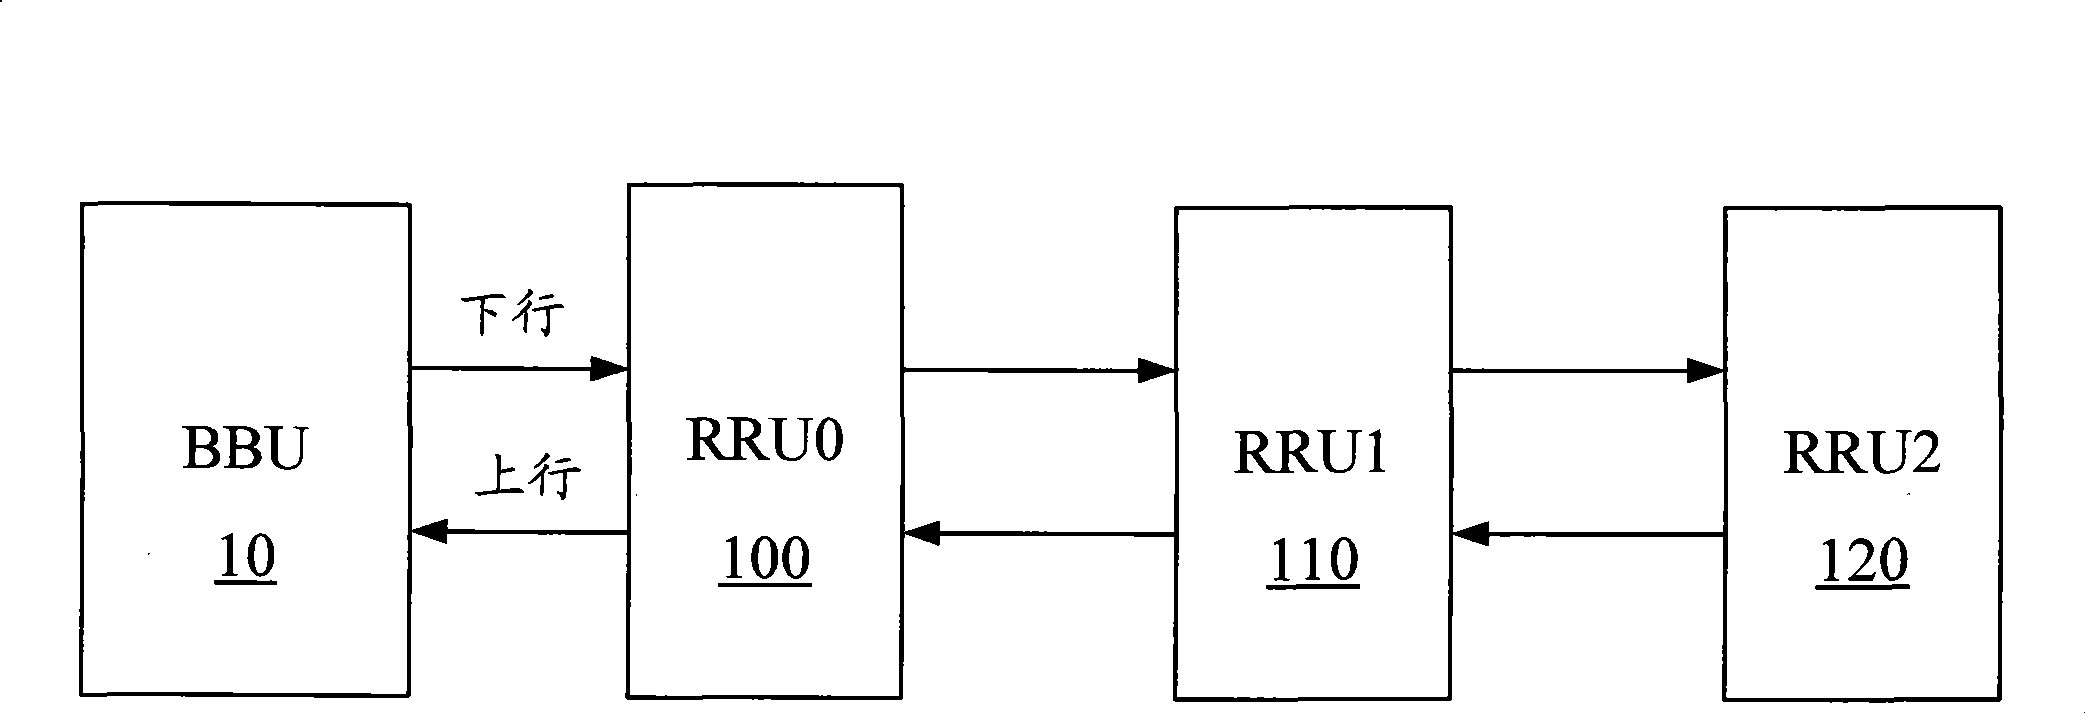 IQ data transmission method of radio frequency zooming unit